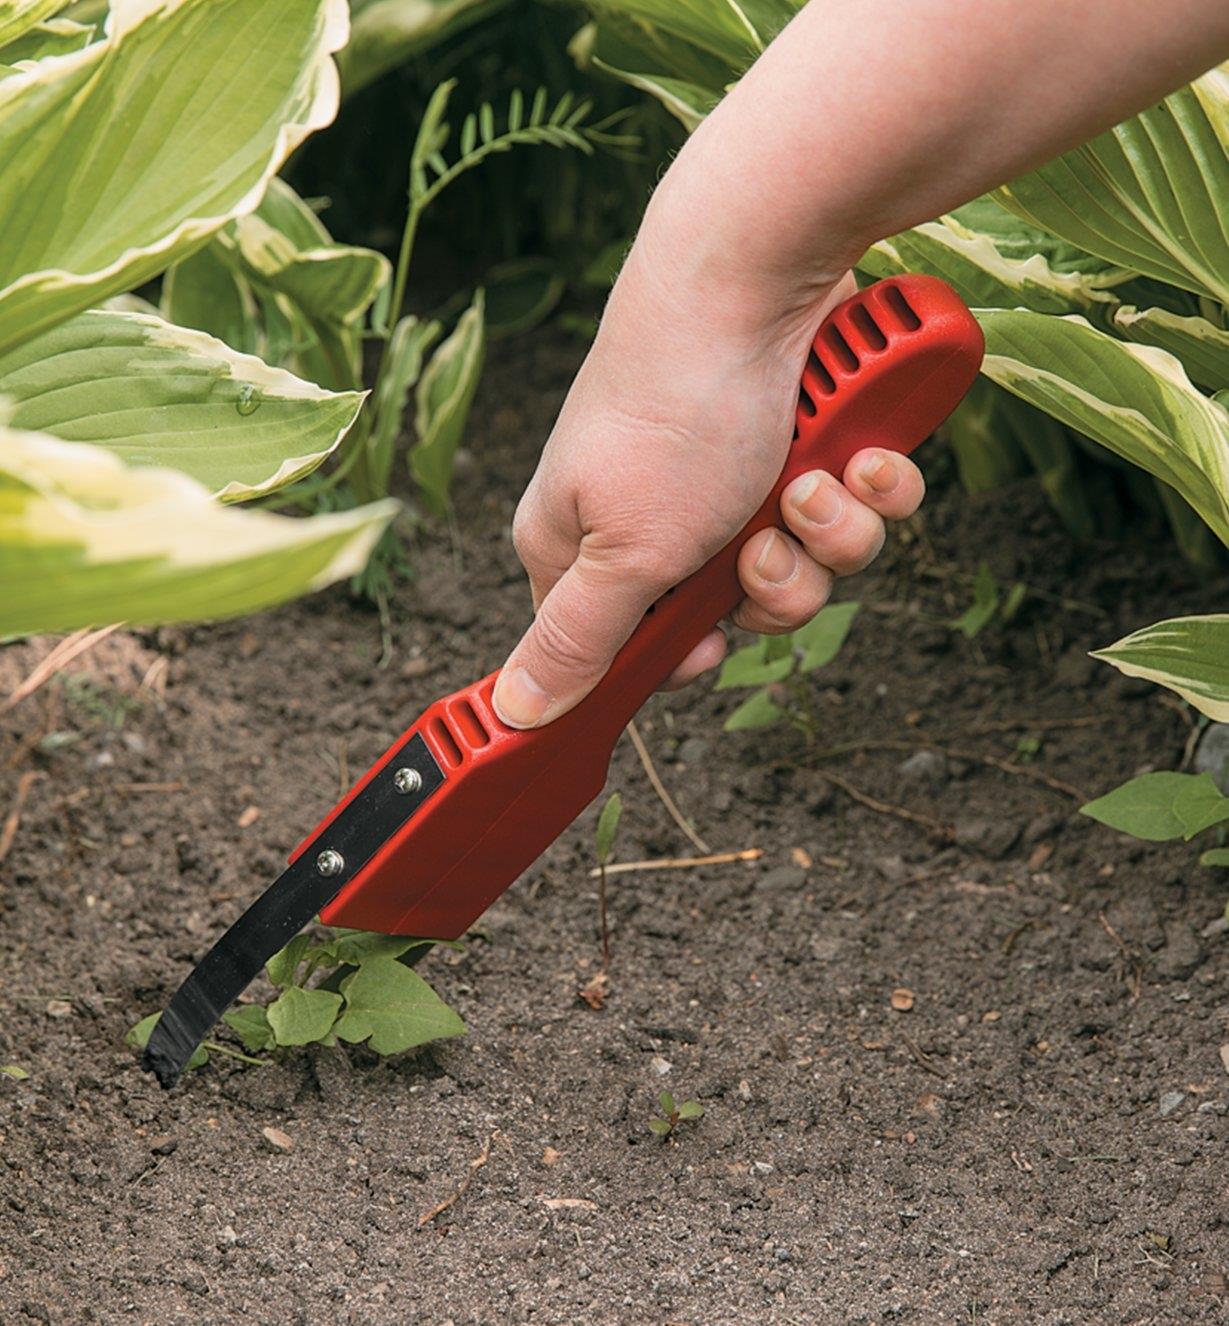 Using the Garden Bandit weeder to slice a weed out of a garden bed